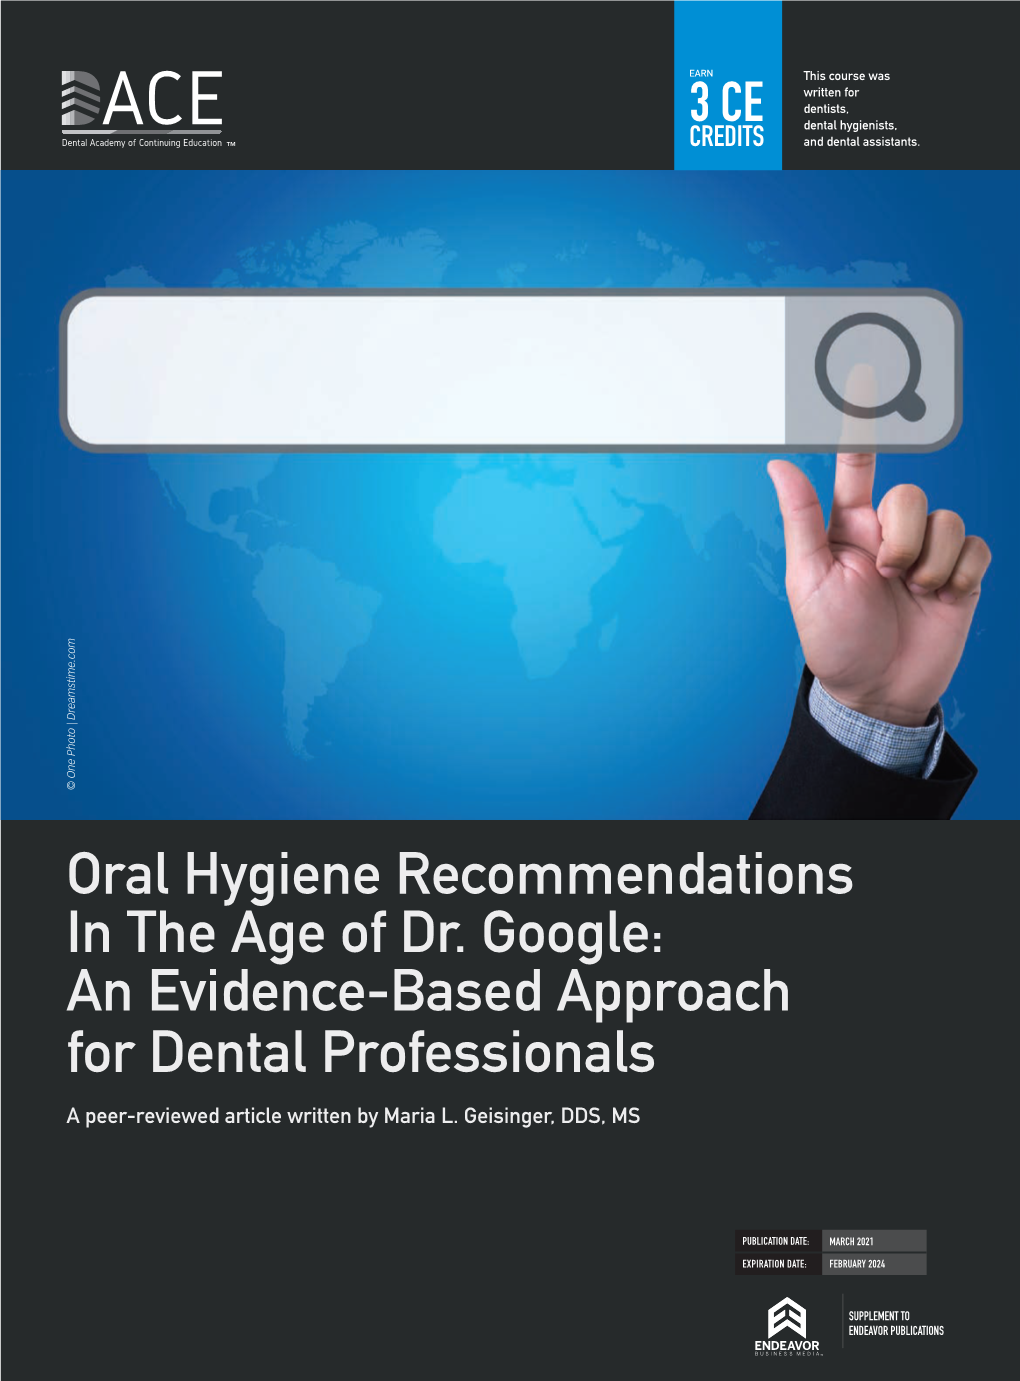 Oral Hygiene Recommendations in the Age of Dr. Google: an Evidence-Based Approach for Dental Professionals a Peer-Reviewed Article Written by Maria L